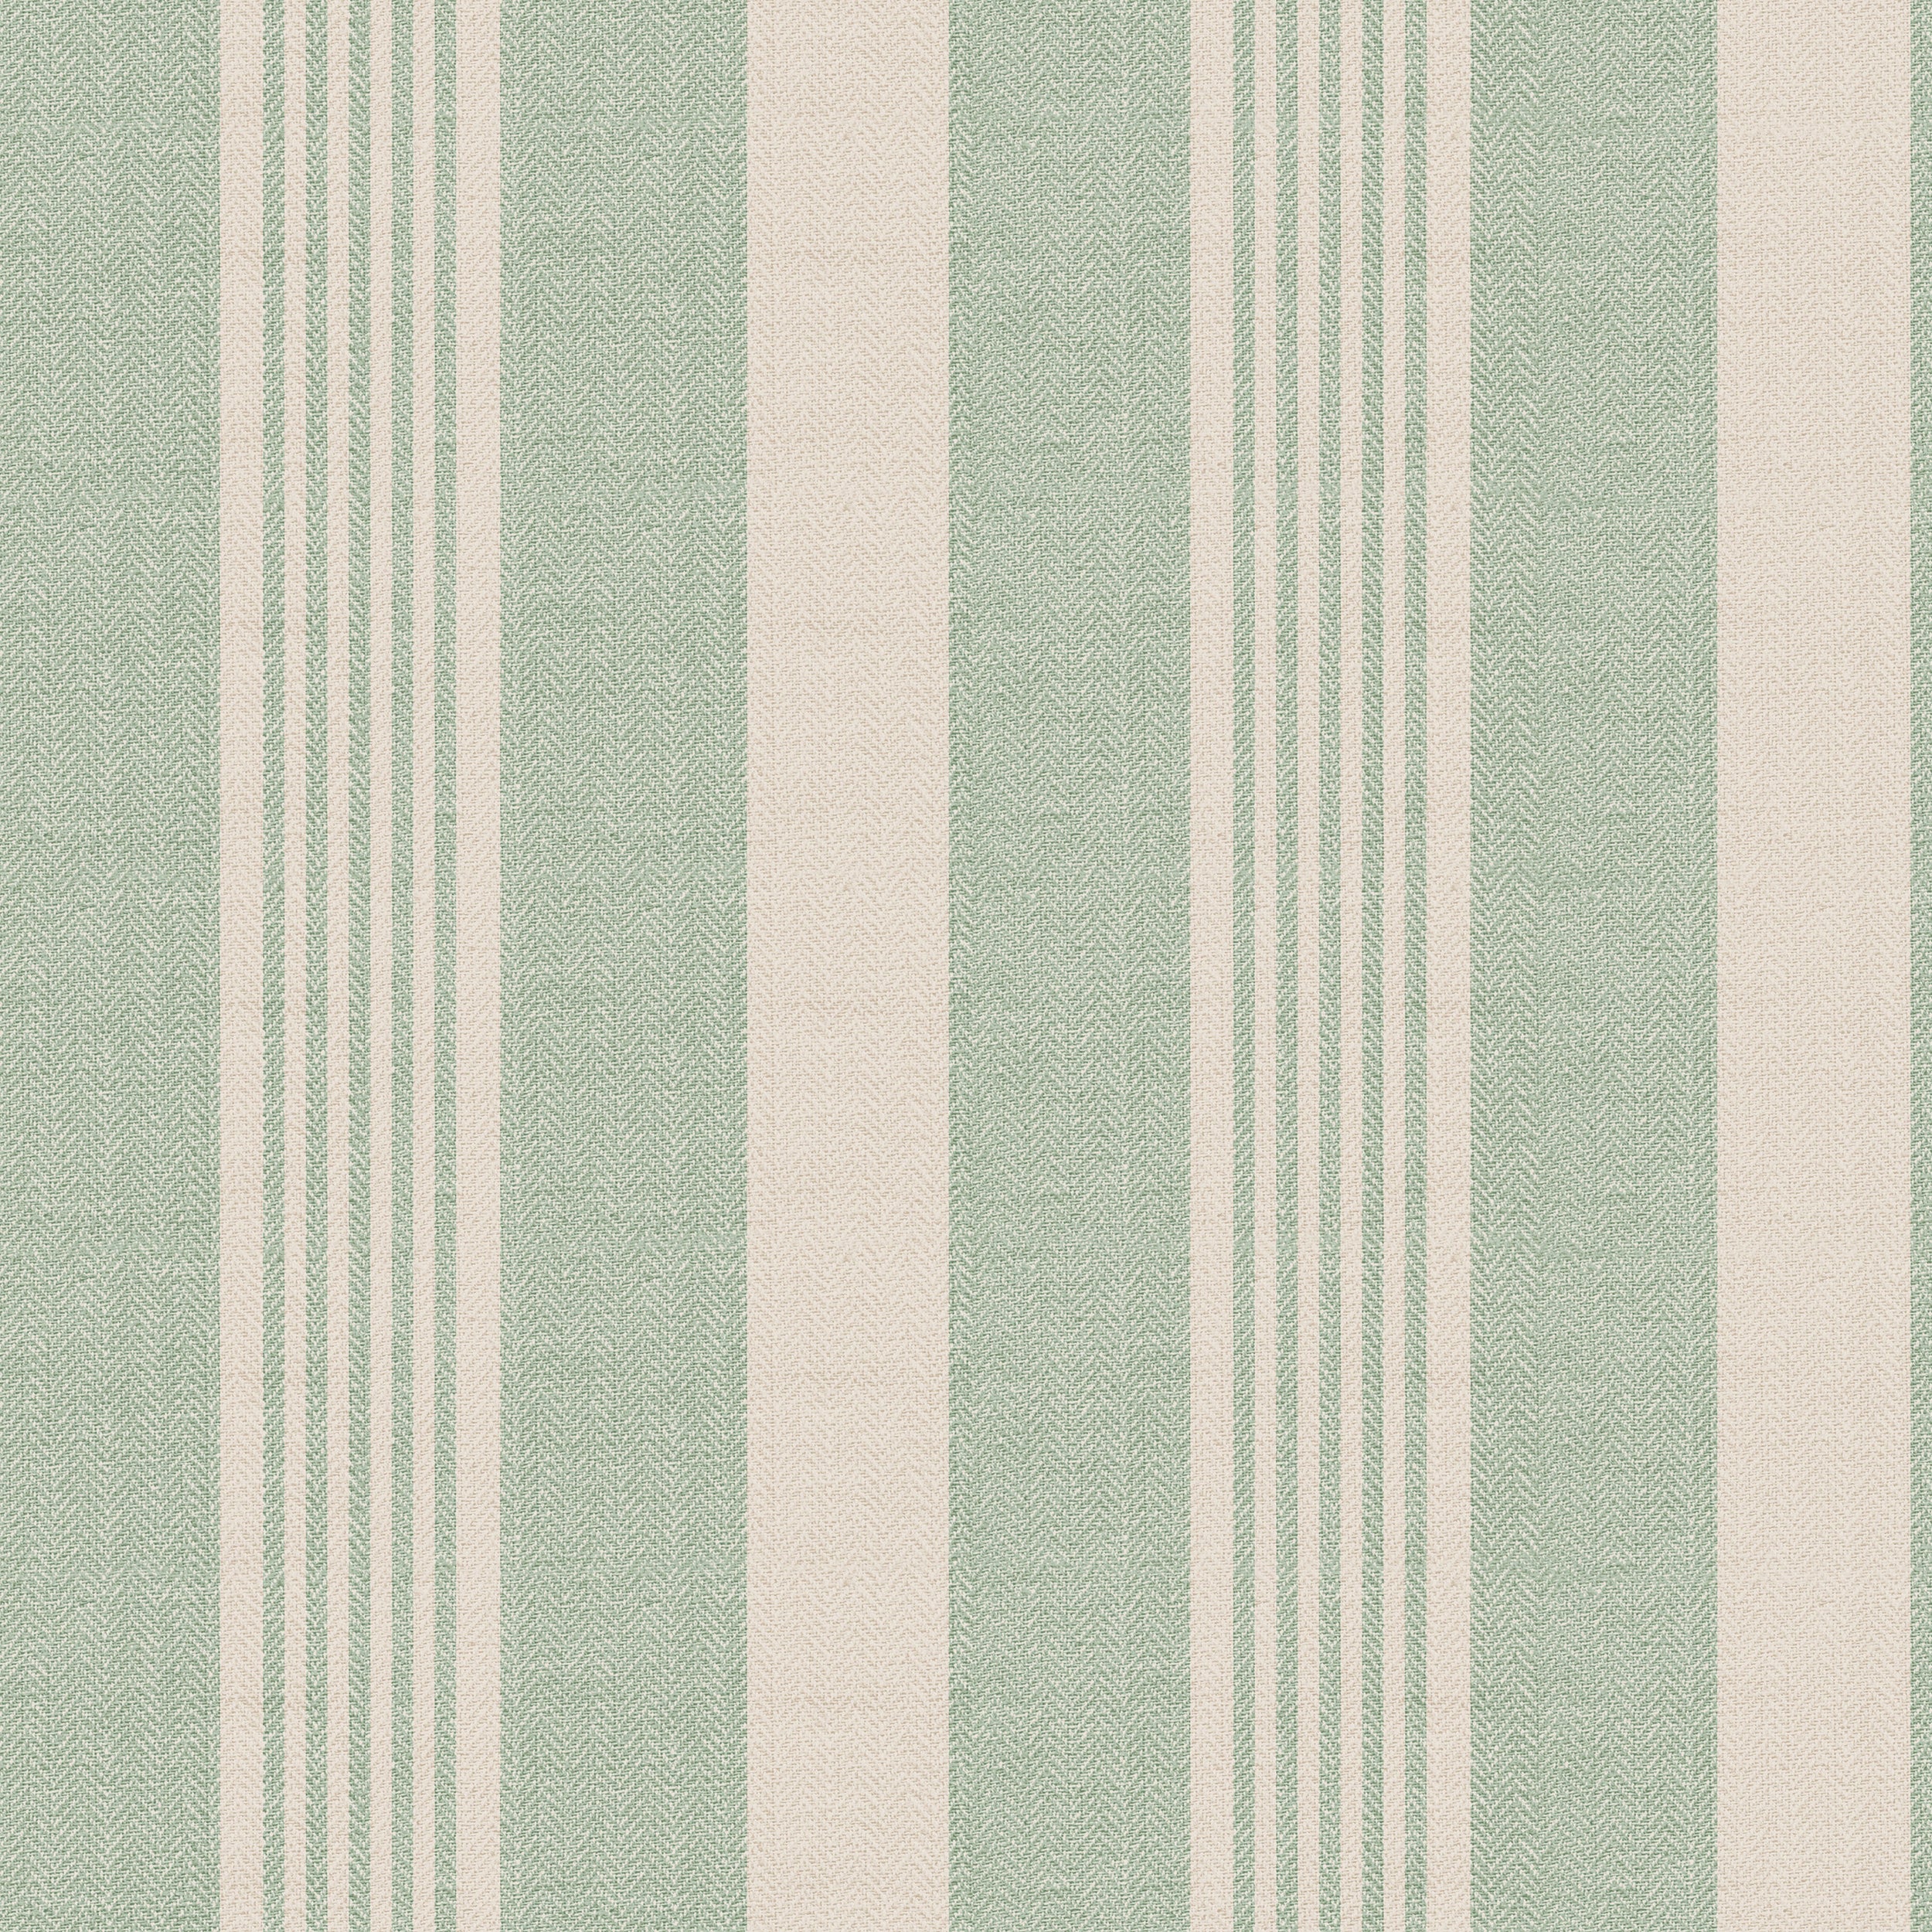 Close-up of Ticking Fabrics 12 Wallpaper featuring elegant vertical stripes in soft sage green and pale cream. The texture is reminiscent of a fine hessian fabric, providing a refreshing and serene aesthetic suitable for sophisticated spaces